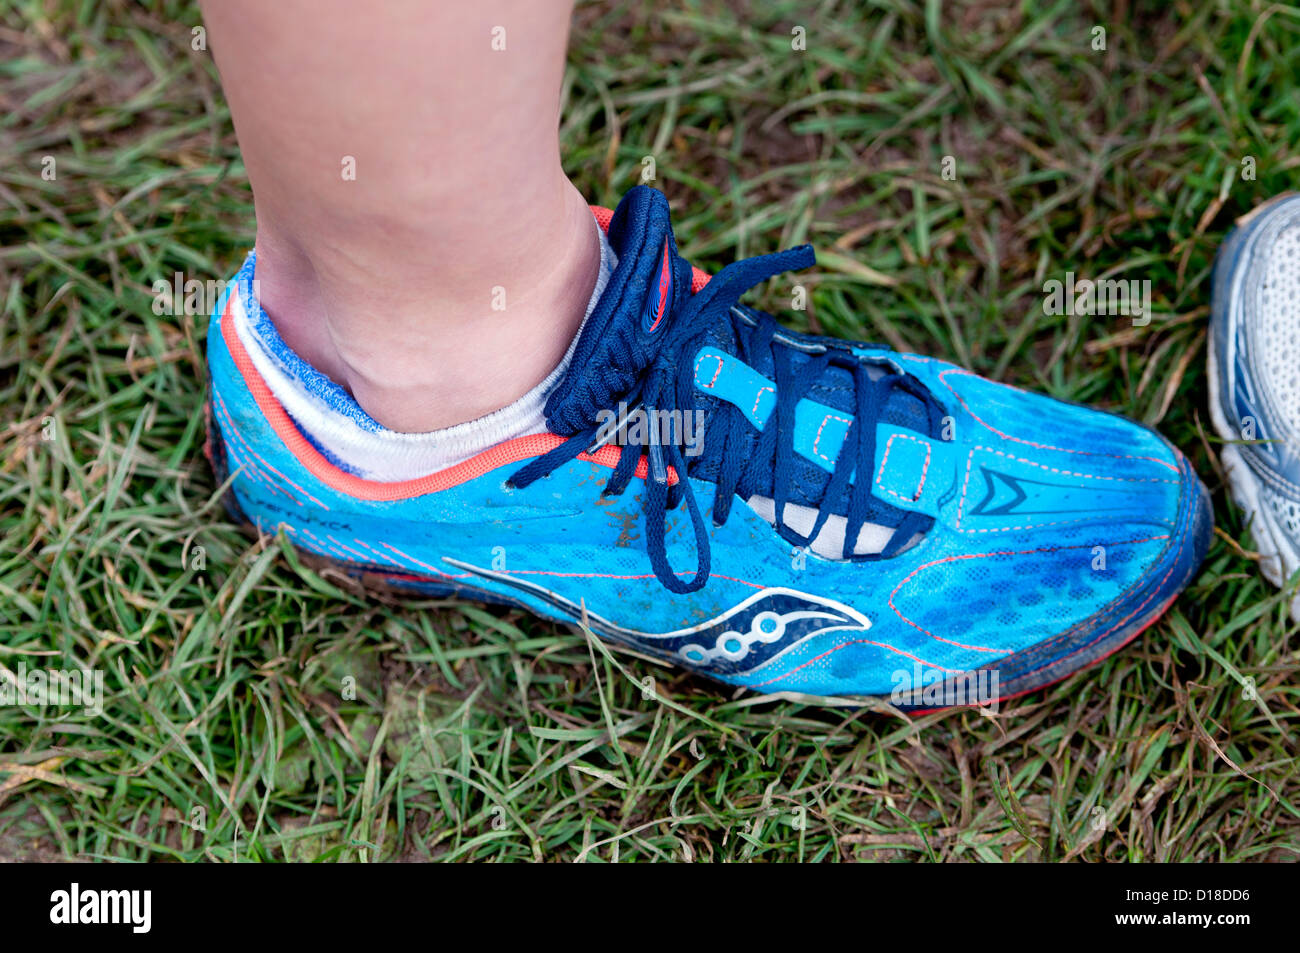 Saucony cross-country running spiked shoe Stock Photo - Alamy